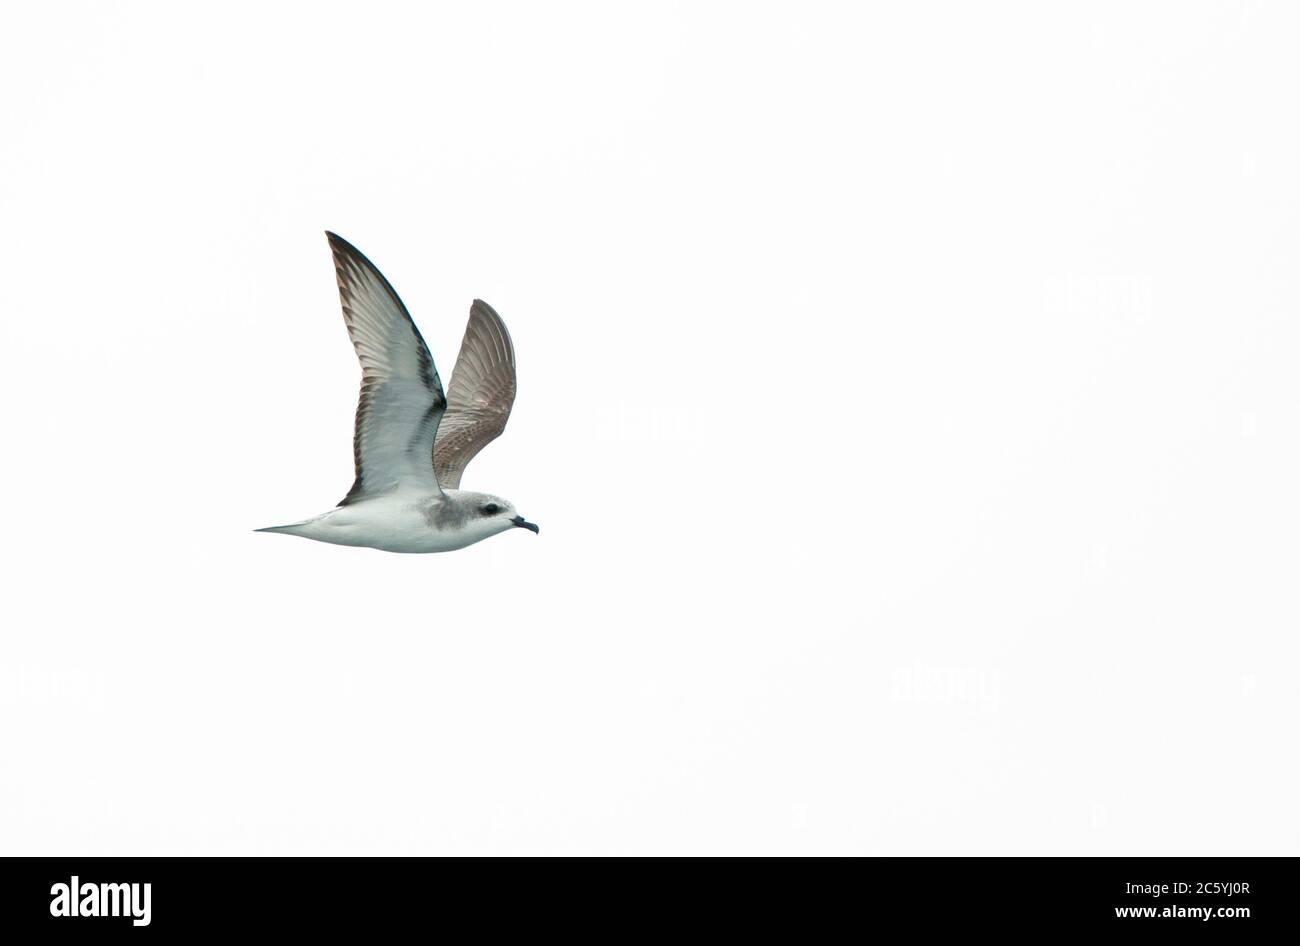 Cook's Petrel (Pterodroma cookii) flying over the Pacific ocean off Lima, Peru. Seen from the side, showing under wing pattern. Stock Photo